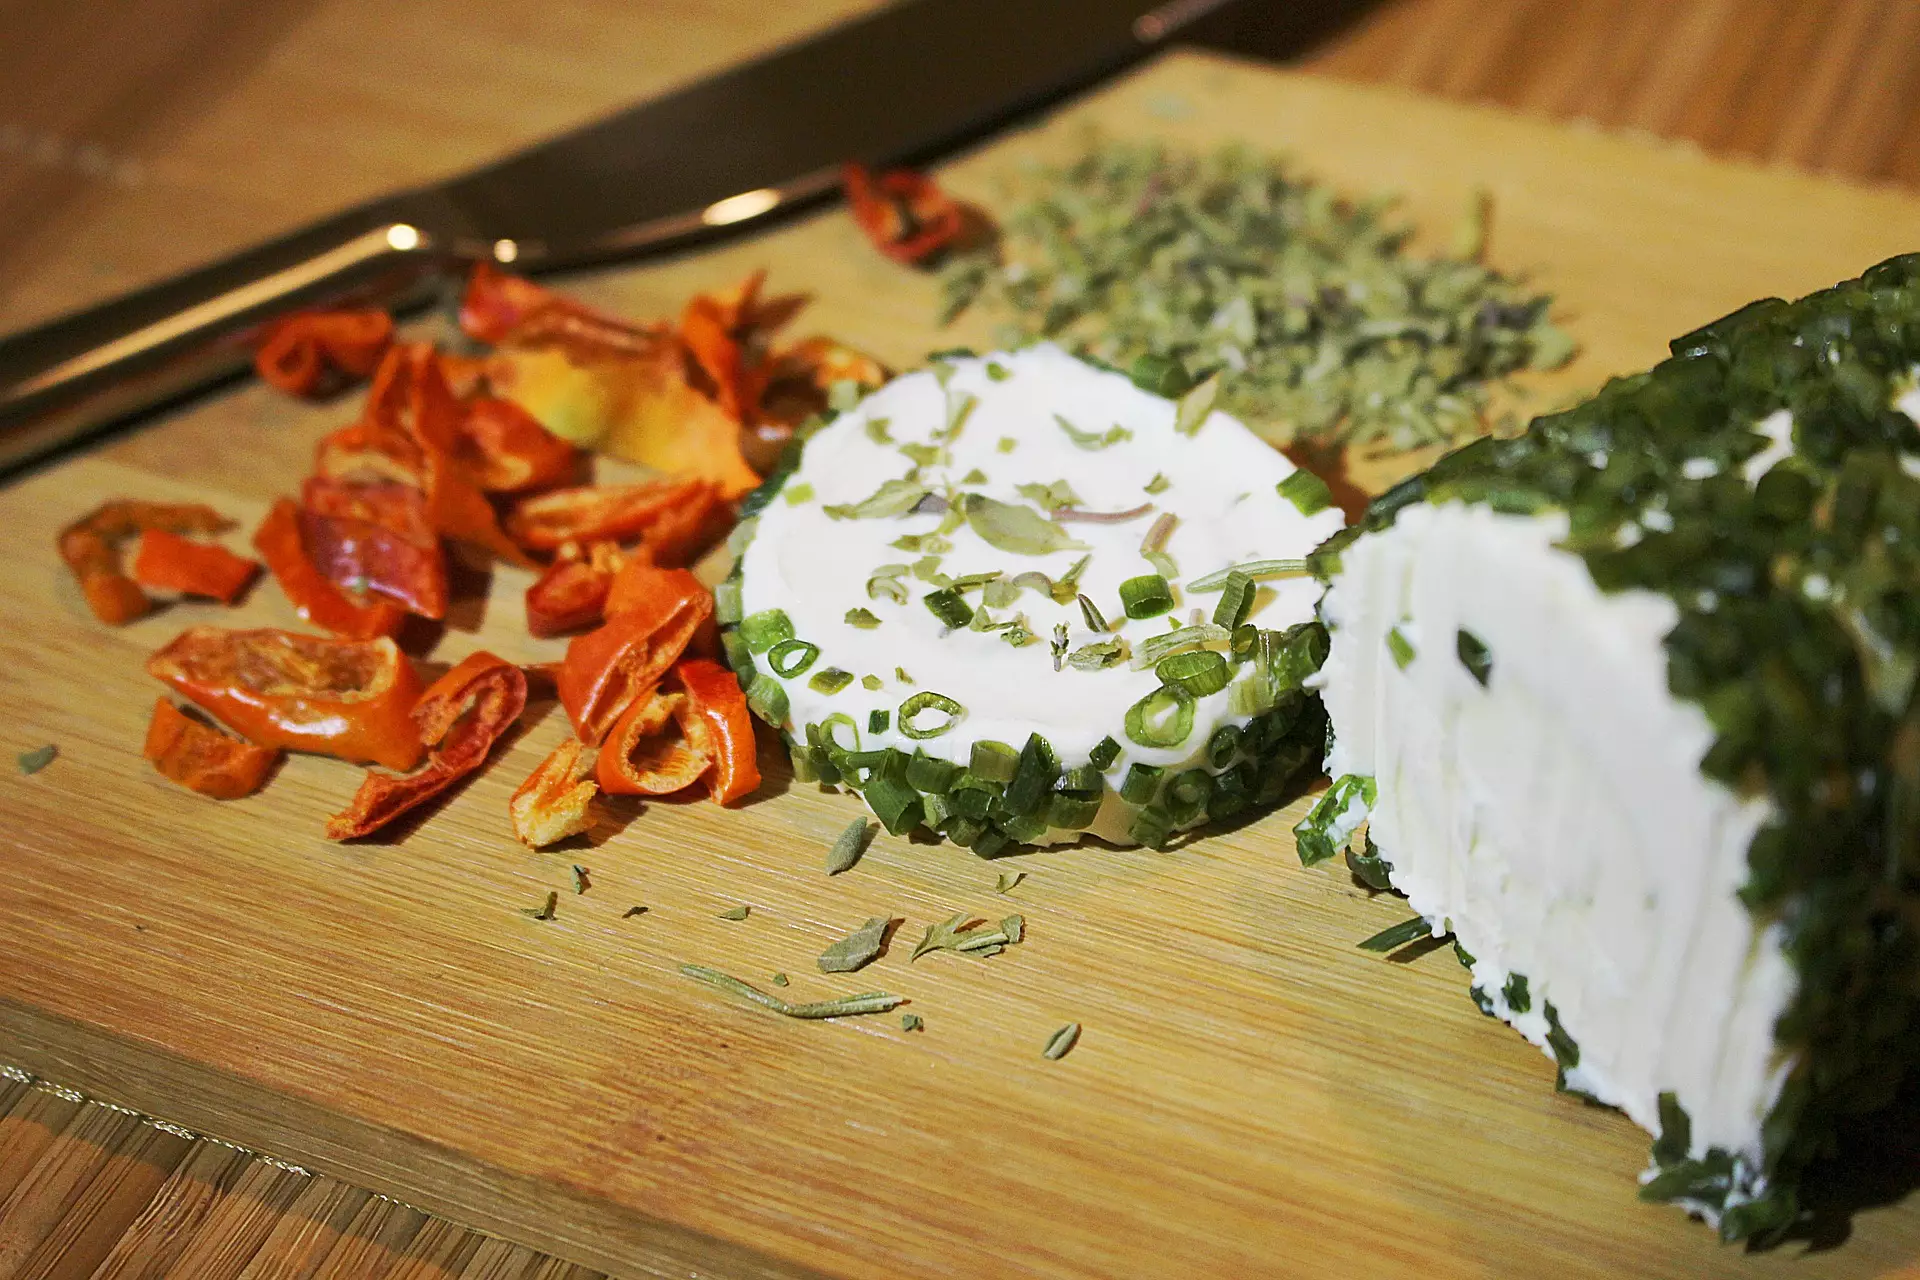 Make your own goat's cheese with another of The Big Cheese Making Kits (